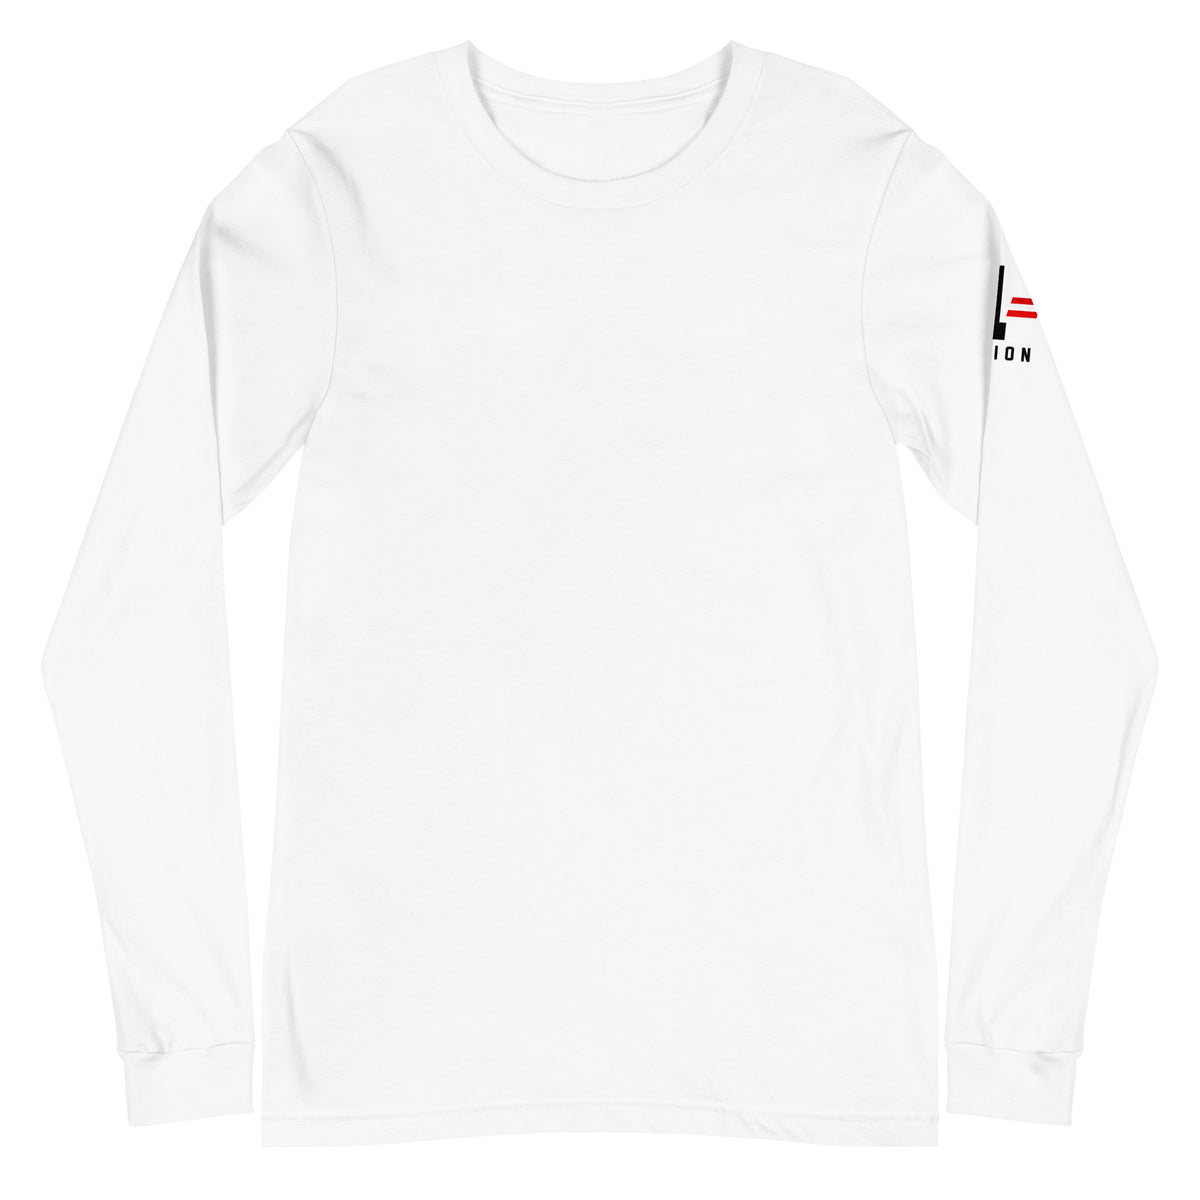 Forefathers Would Be Shooting: Light Long Sleeve